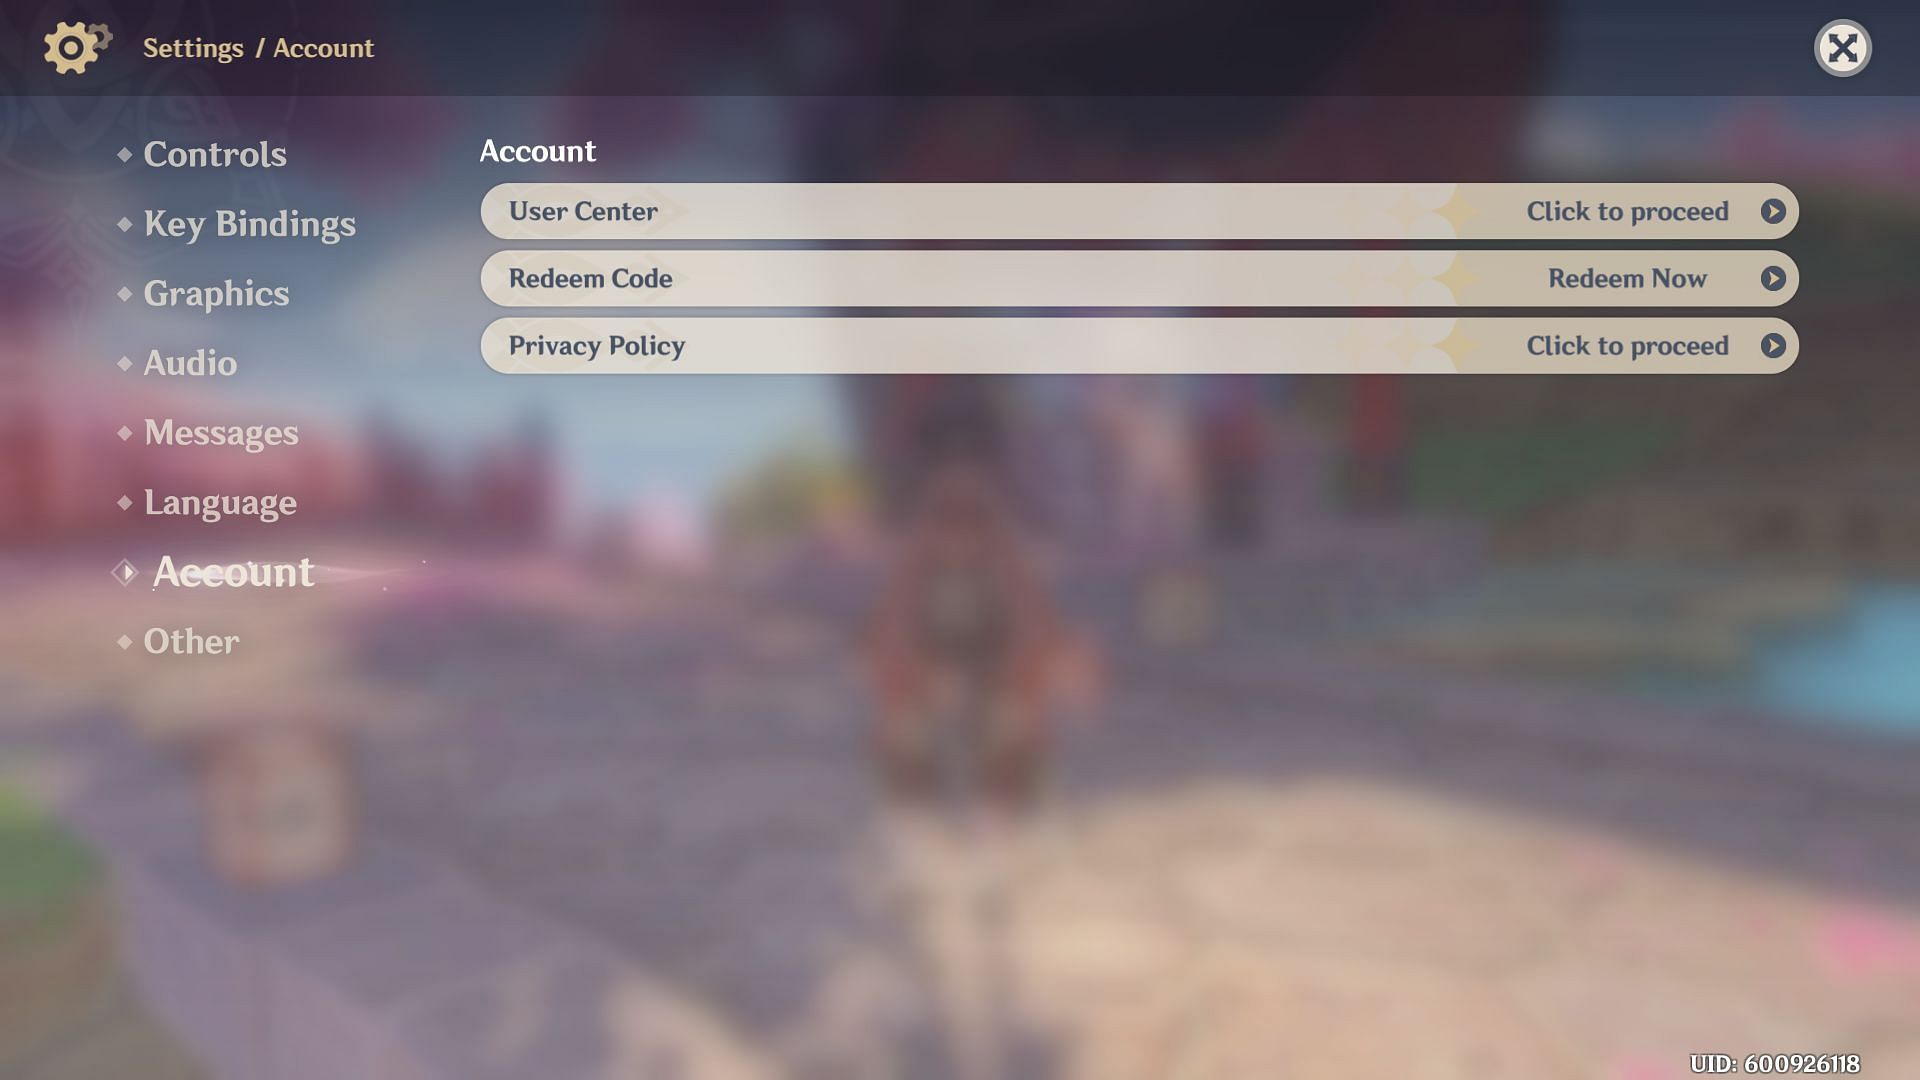 Go to the Account section in the main menu (Image via Hoyoverse)